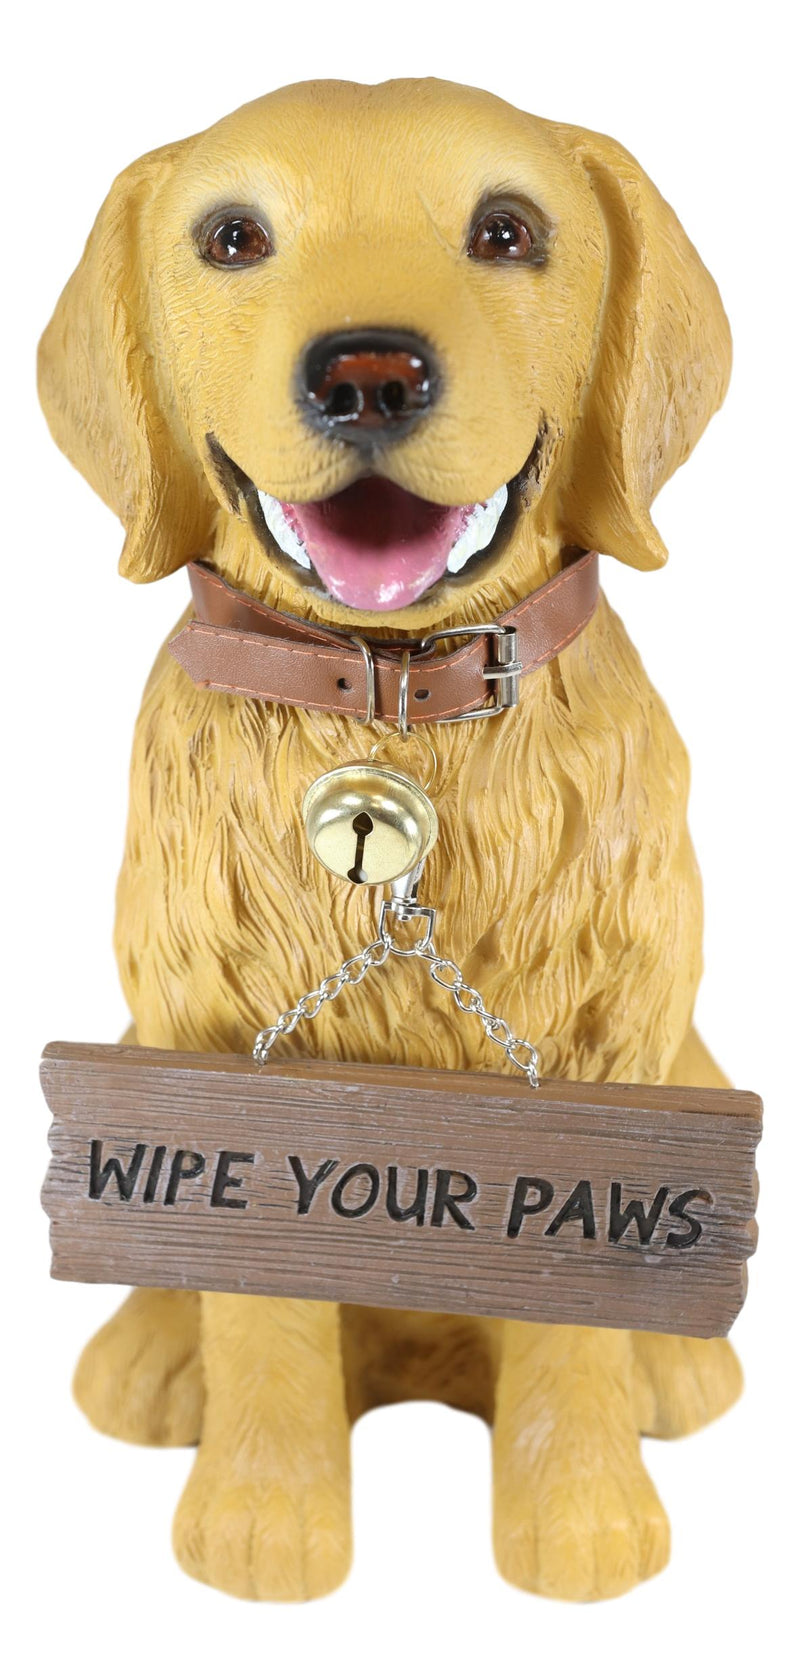 Ebros Large Golden Retriever Puppy  Decor Statue With Jingle Collar Greeting Sign